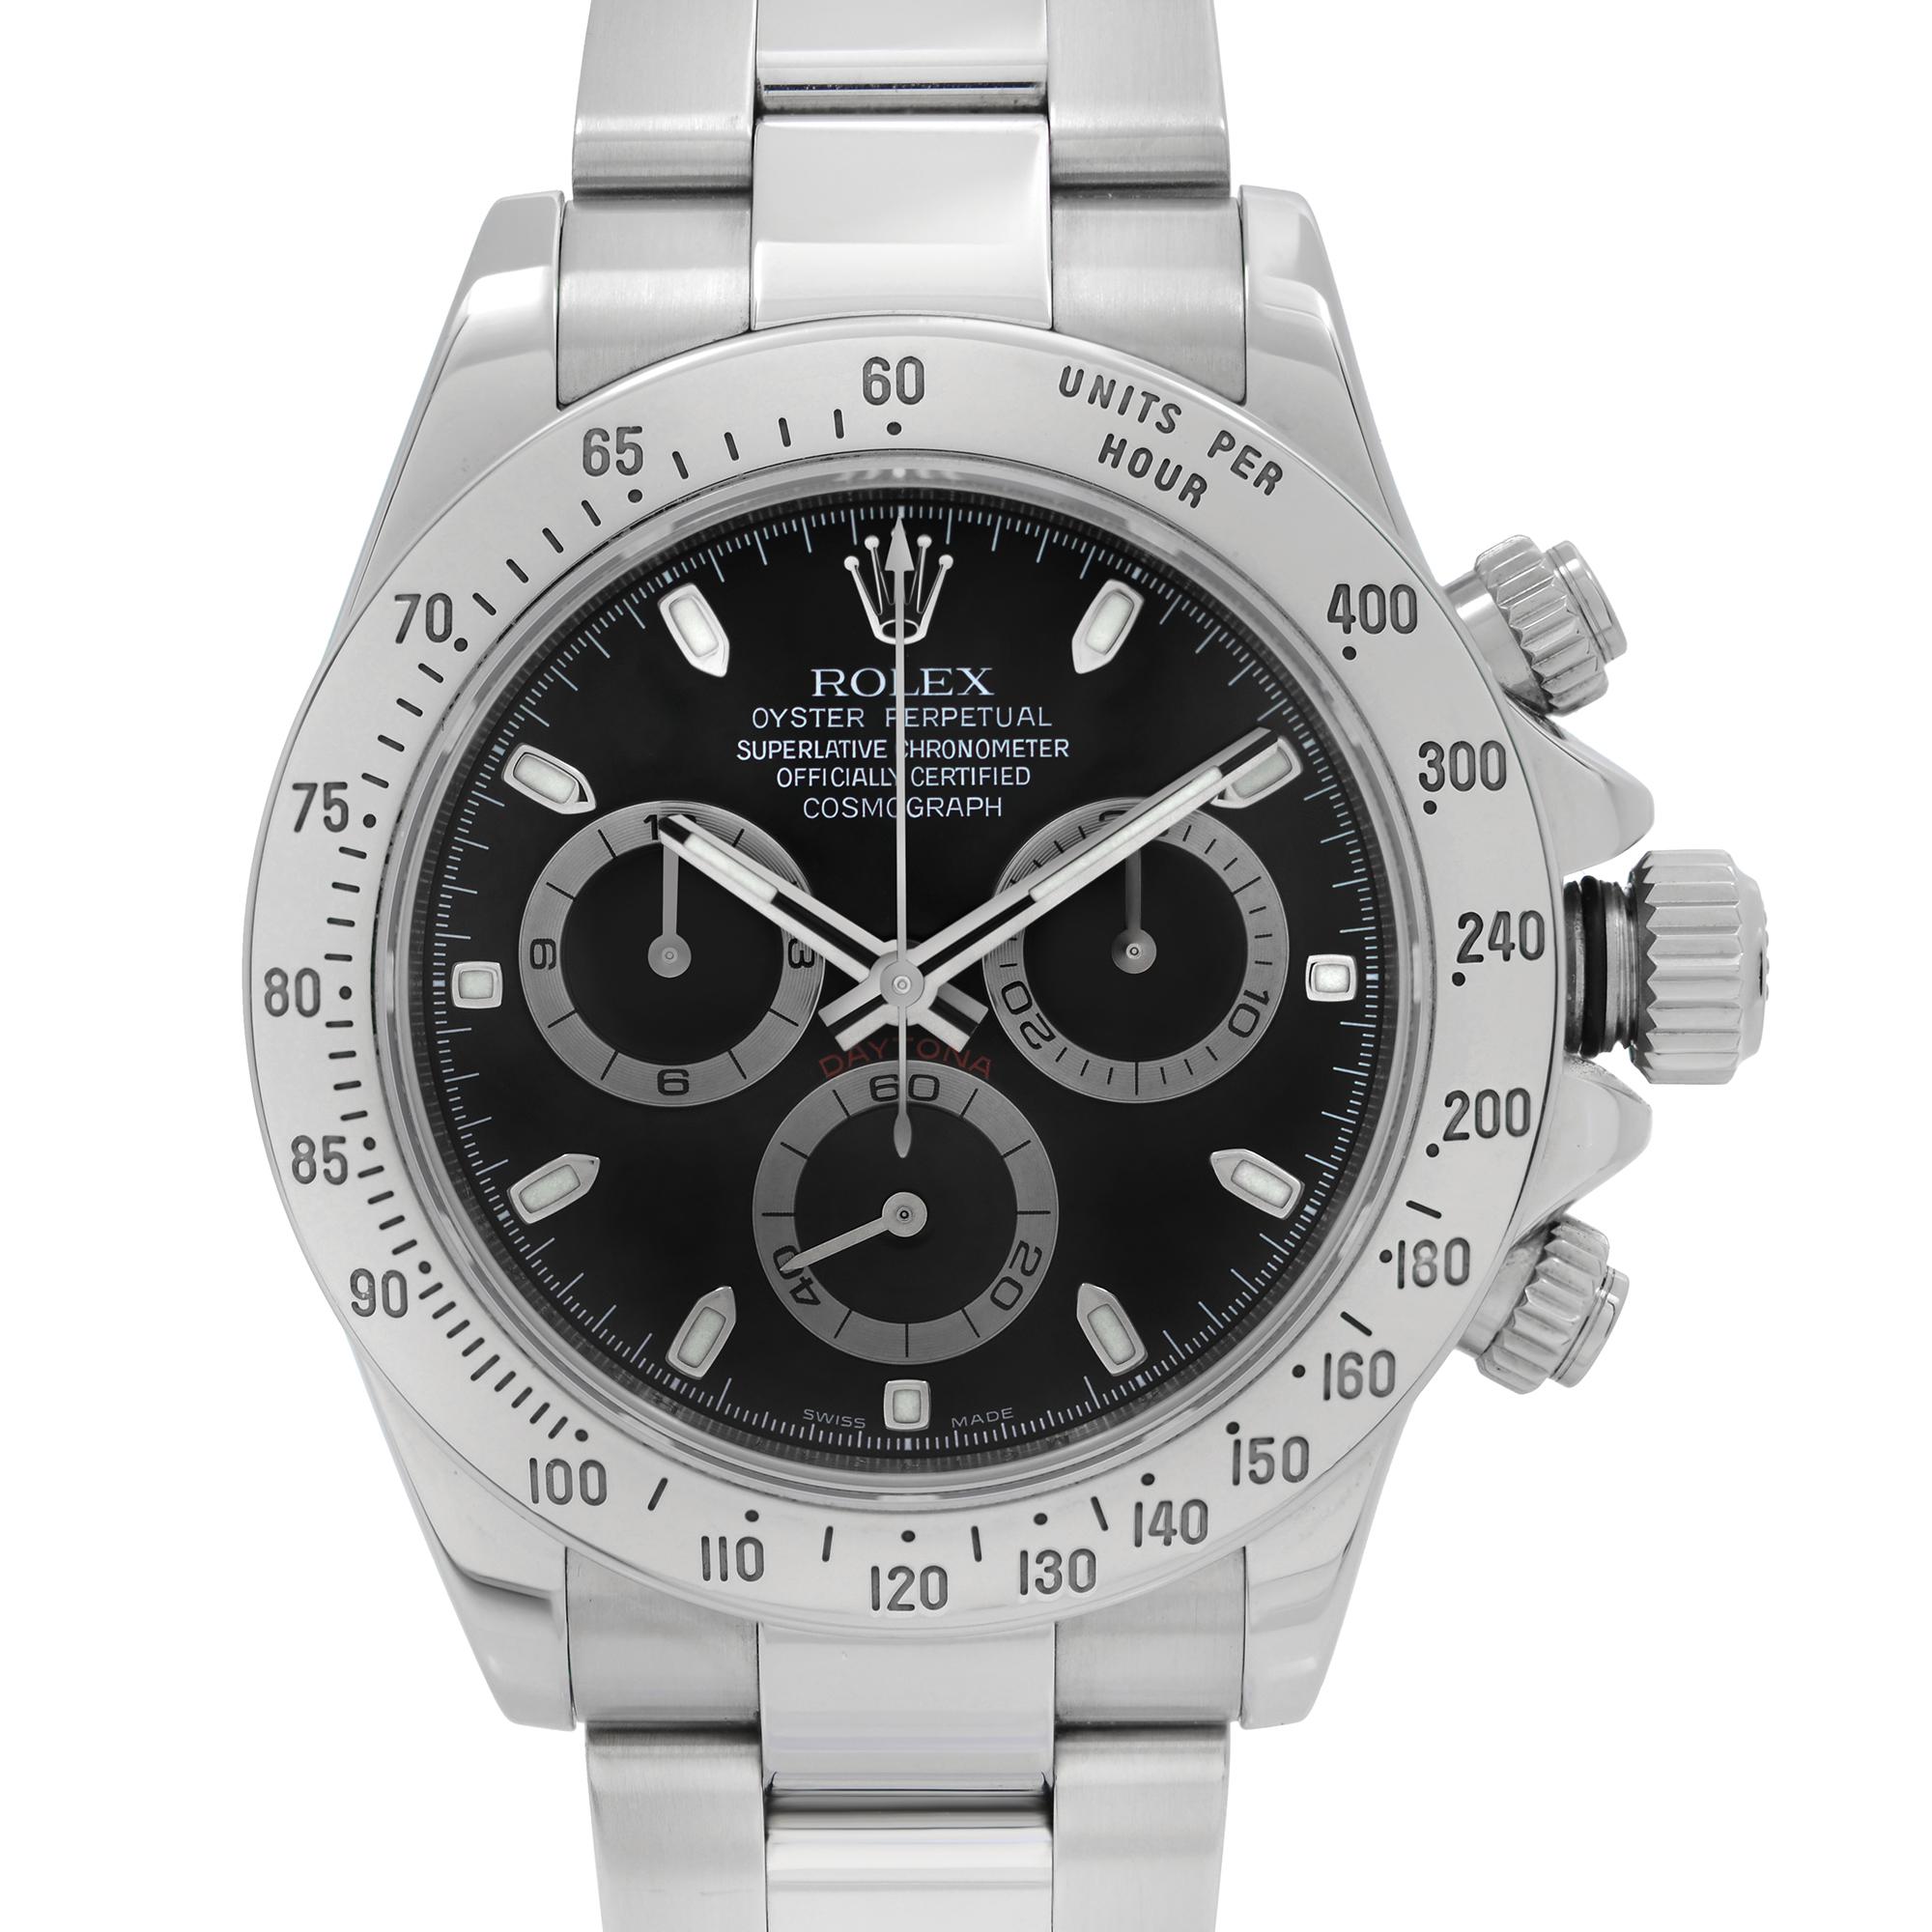 Pre Owned Rolex Daytona Cosmograph 40mm Steel Black Index Dial Automatic Men's Watch 116520. This Beautiful Timepiece was Produced in 2007-2008 & is Powered by Mechanical (Automatic) Movement And Features: Round Stainless Steel Case with an Oyster